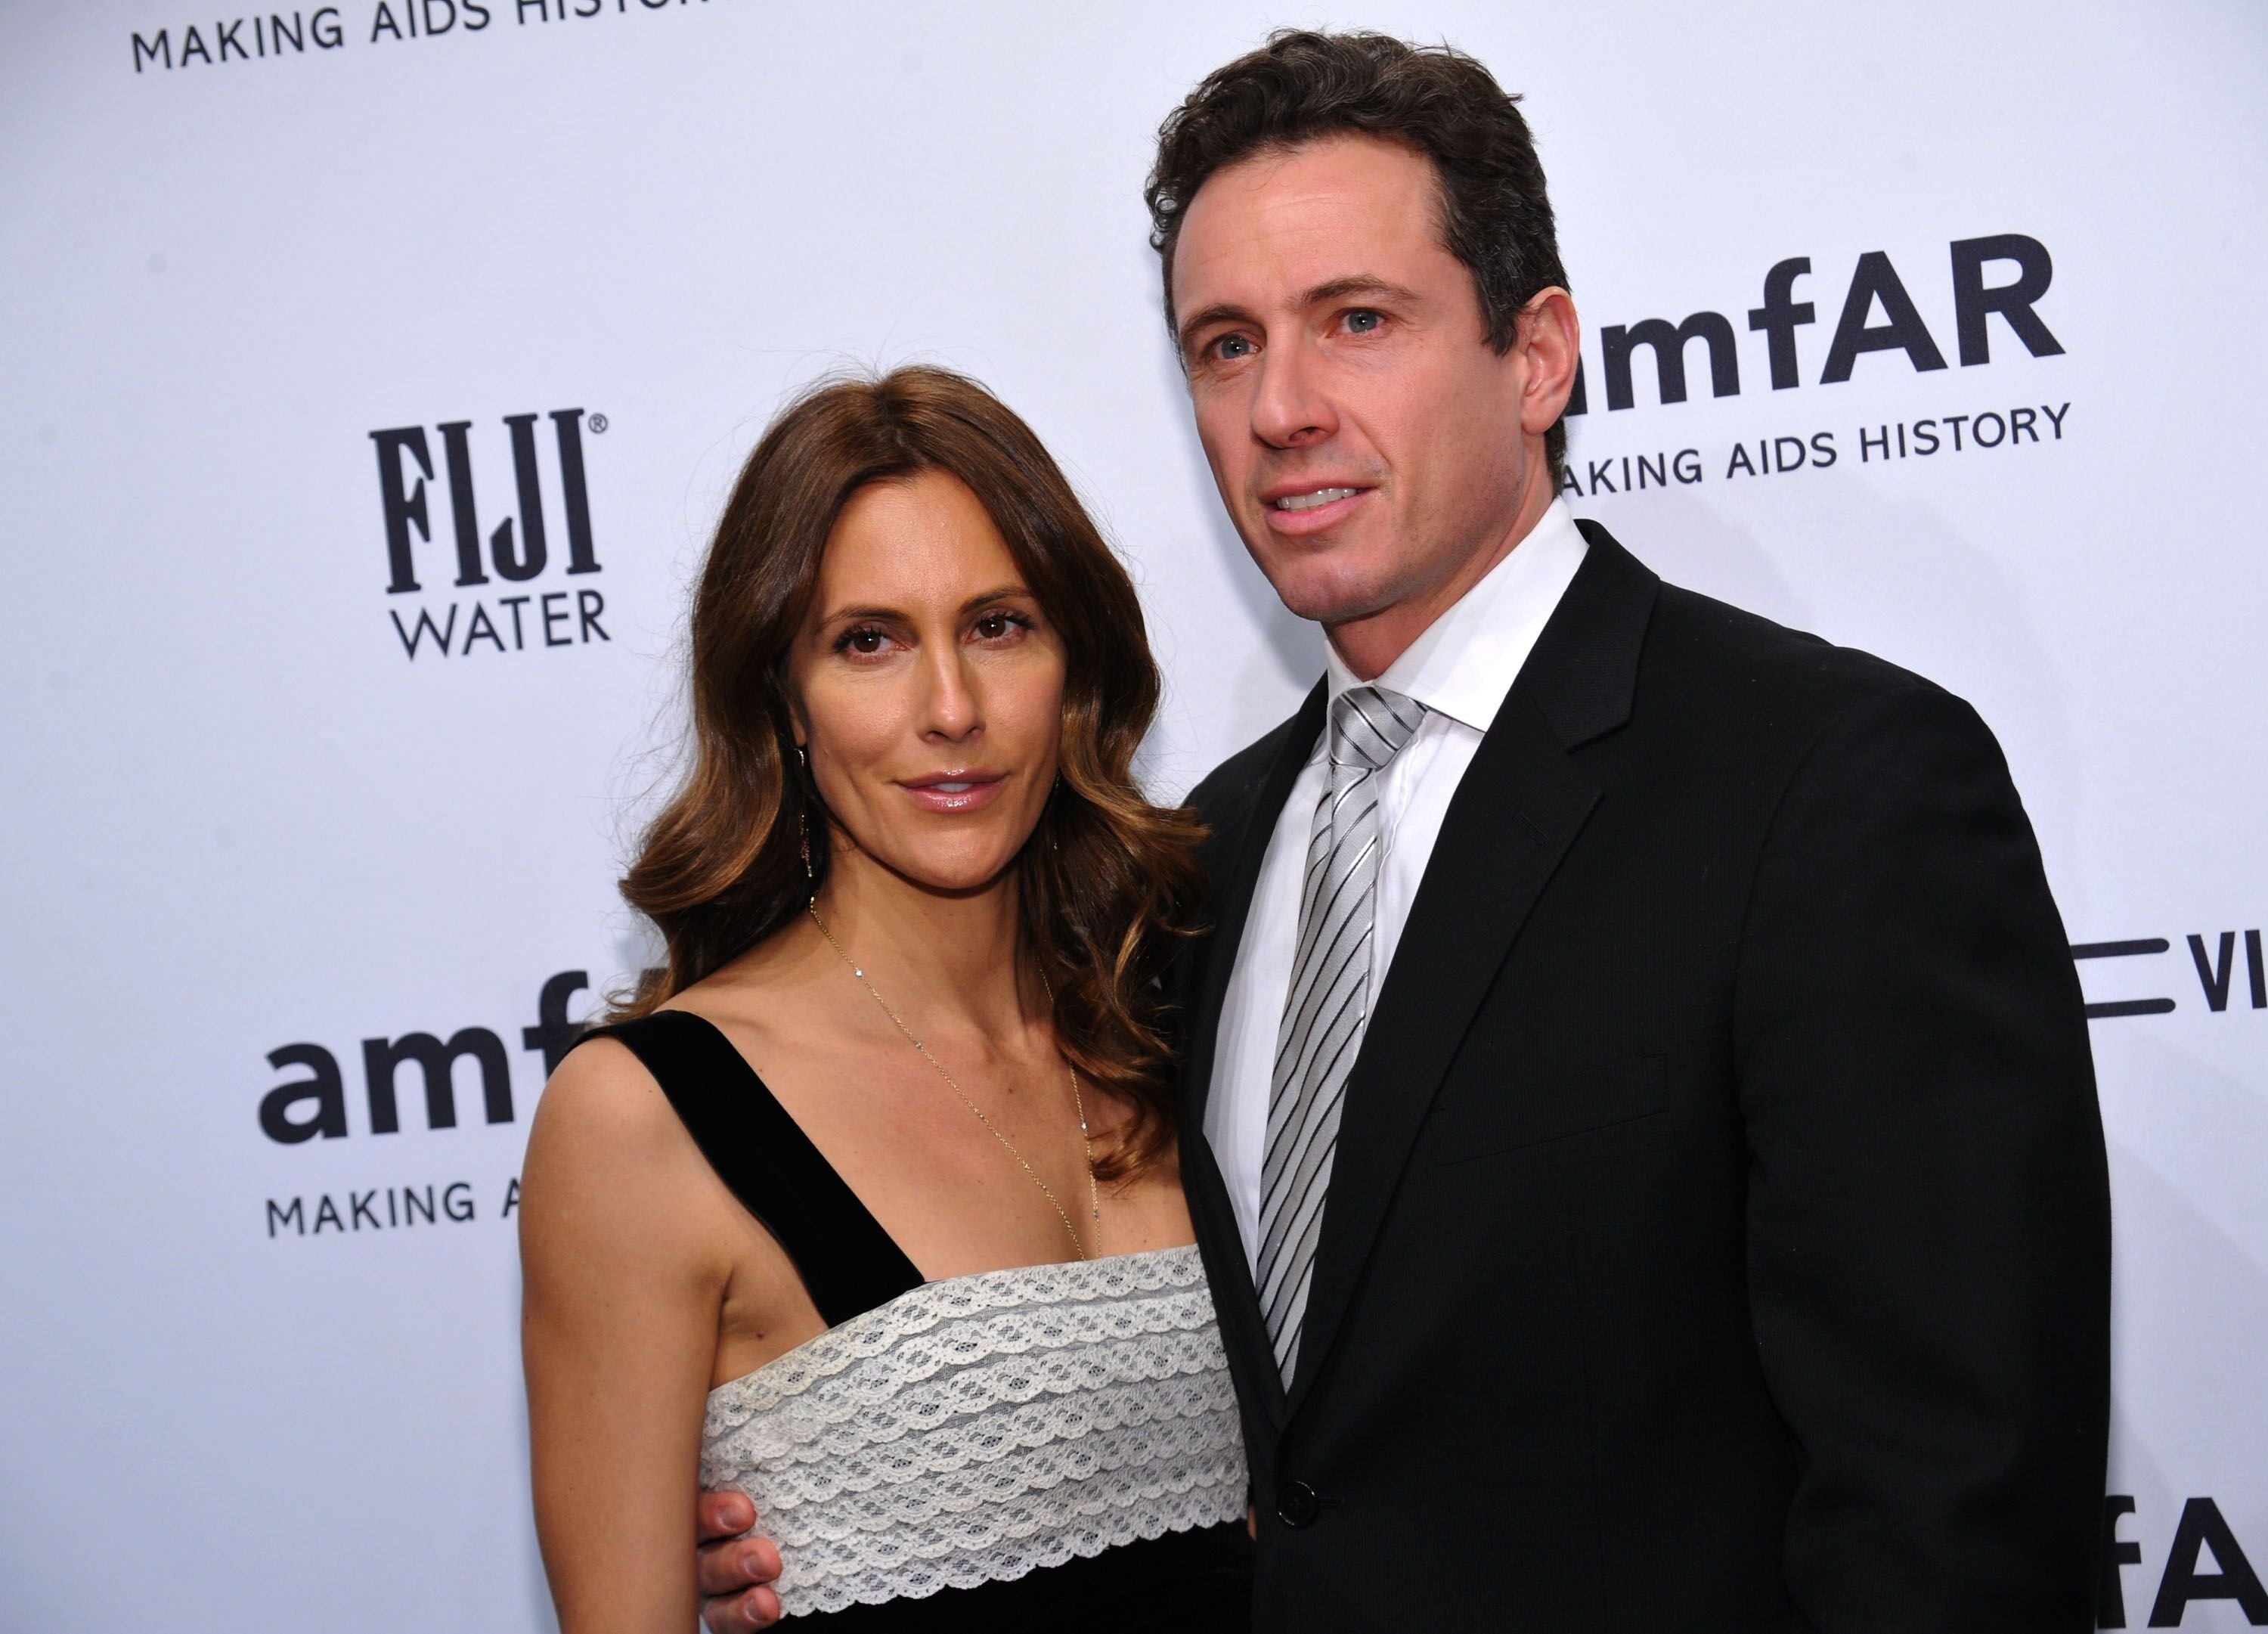 Cristina and Chris Cuomo at the amfAR New York Gala to kick off Fall Fashion Week on February 6, 2013, in New York City | Photo: Bryan Bedder/Getty Images